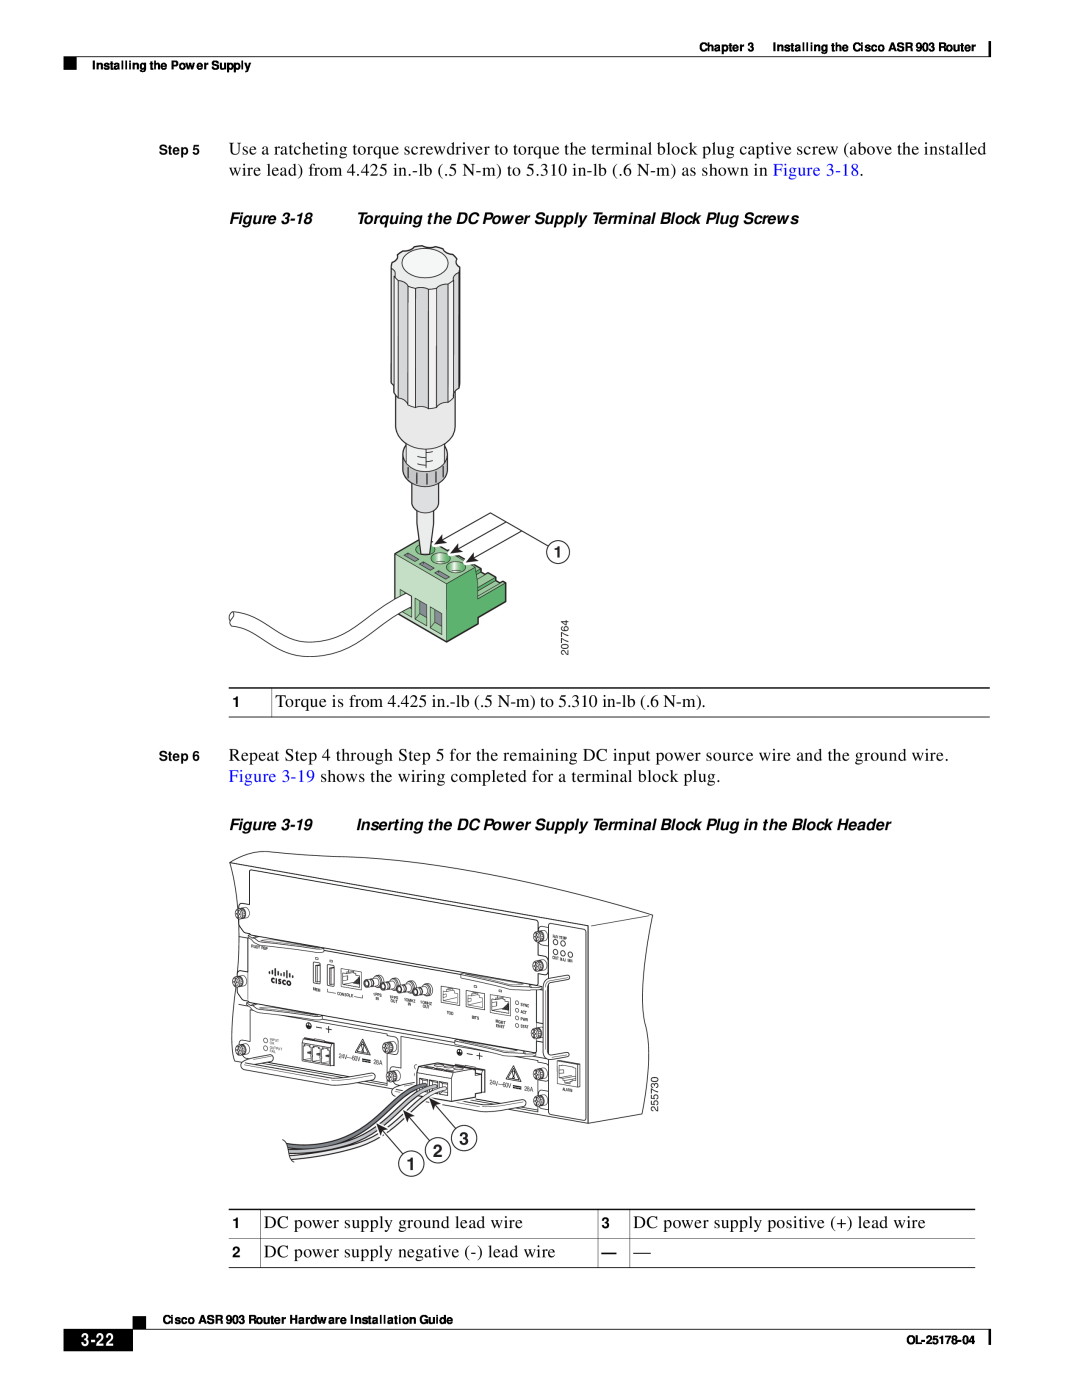 Cisco Systems ASR 903 manual 3-22, Torque is from 4.425 in.-lb .5 N-m to 5.310 in-lb .6 N-m 